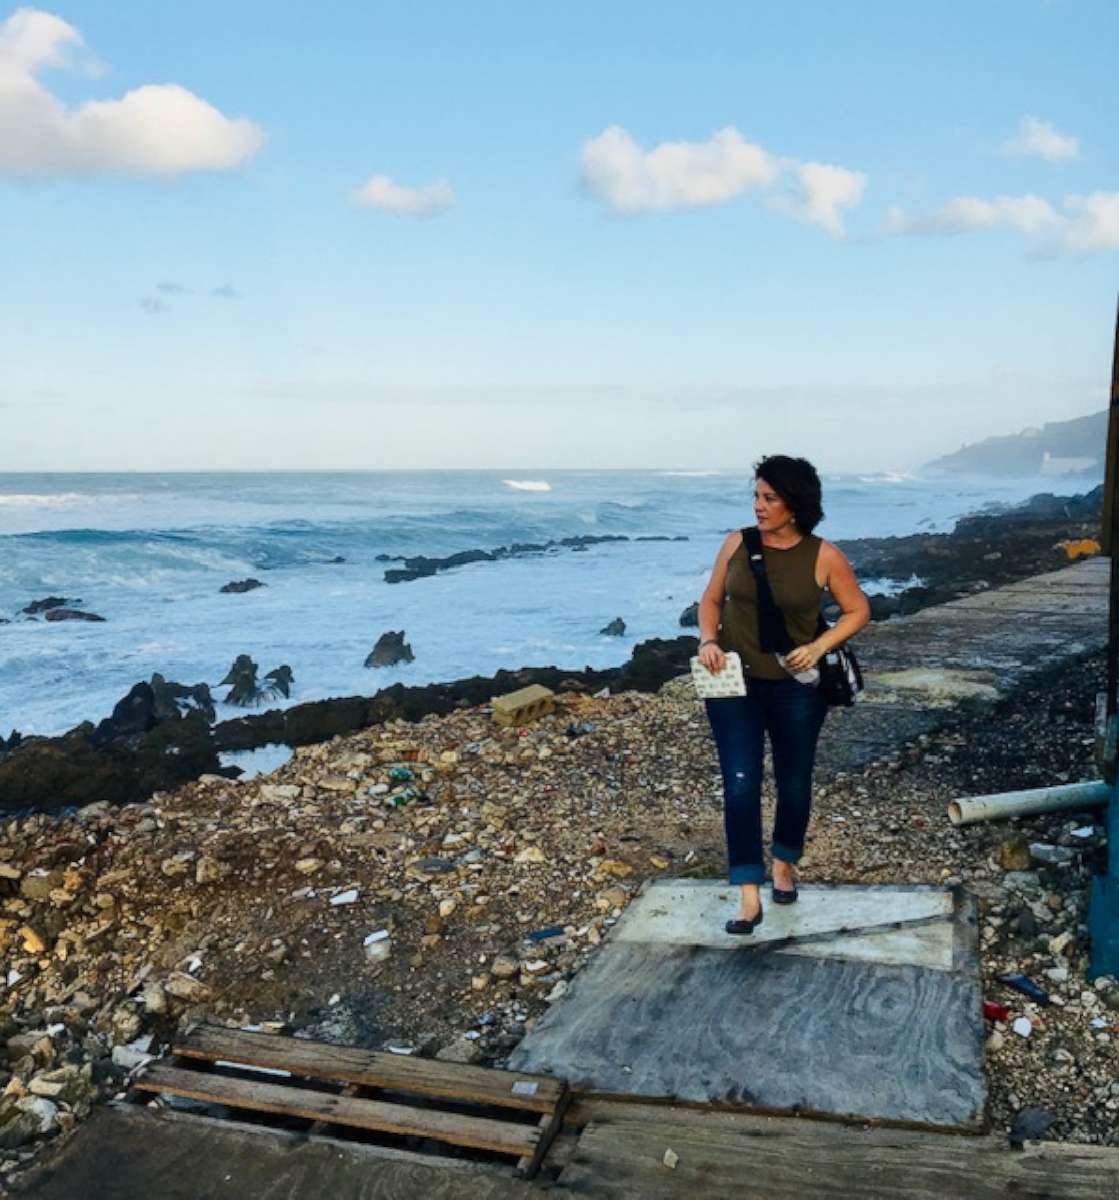 PHOTO: Nancy Alvarez, pictured here in the neighborhood of La Perla in San Juan, Puerto Rico, was one of the first reporters from the mainland on the ground in Puerto Rico after Hurricane Maria in 2017.   